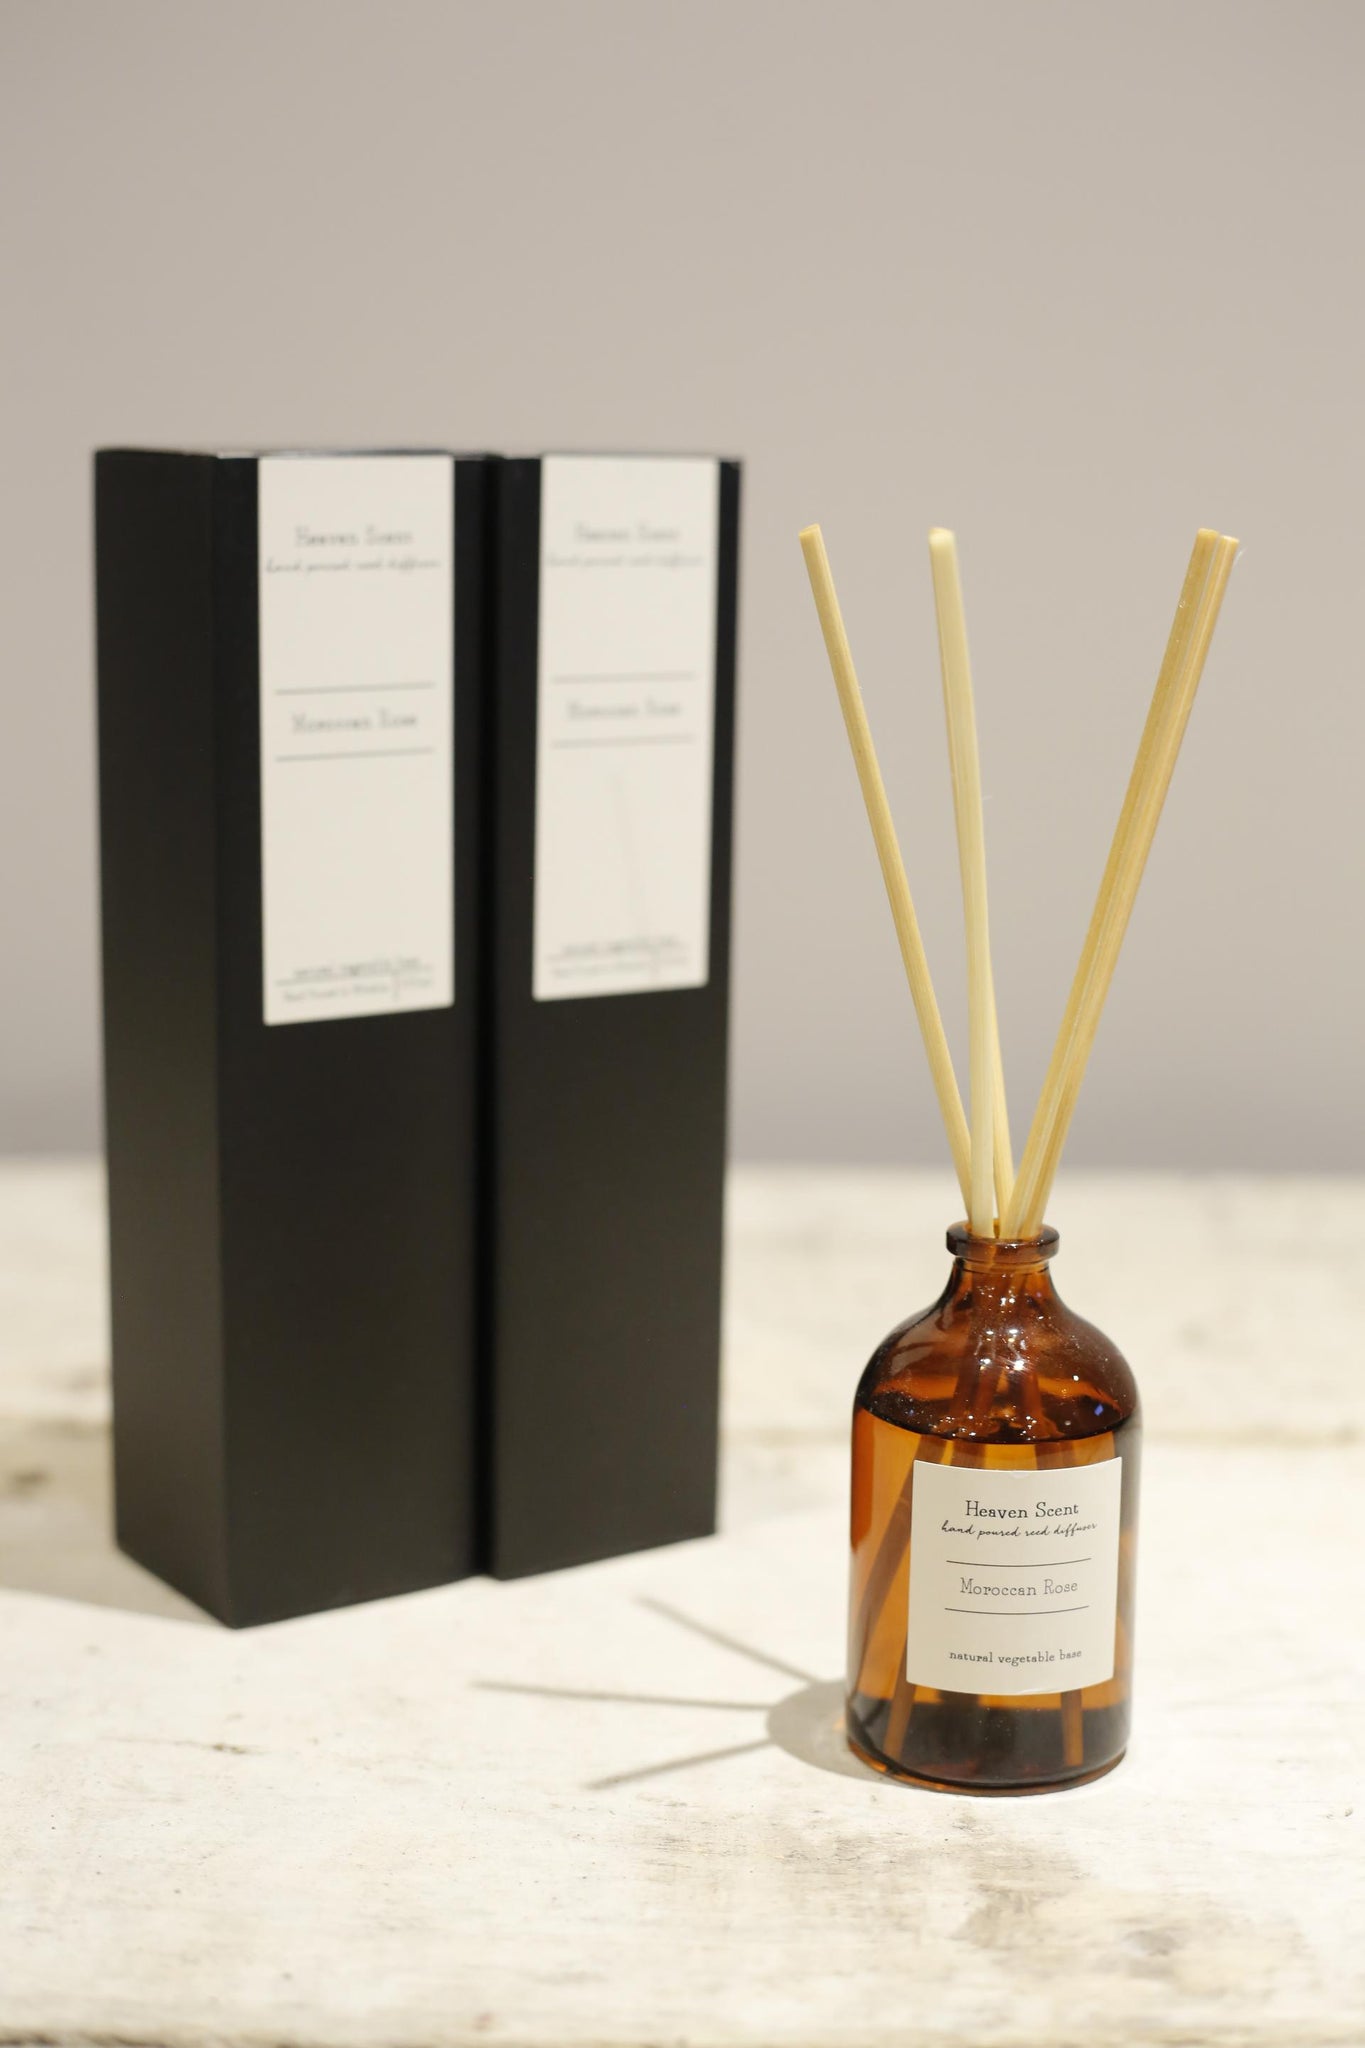 Heaven Scent reed diffuser- Moroccan Rose 100ml